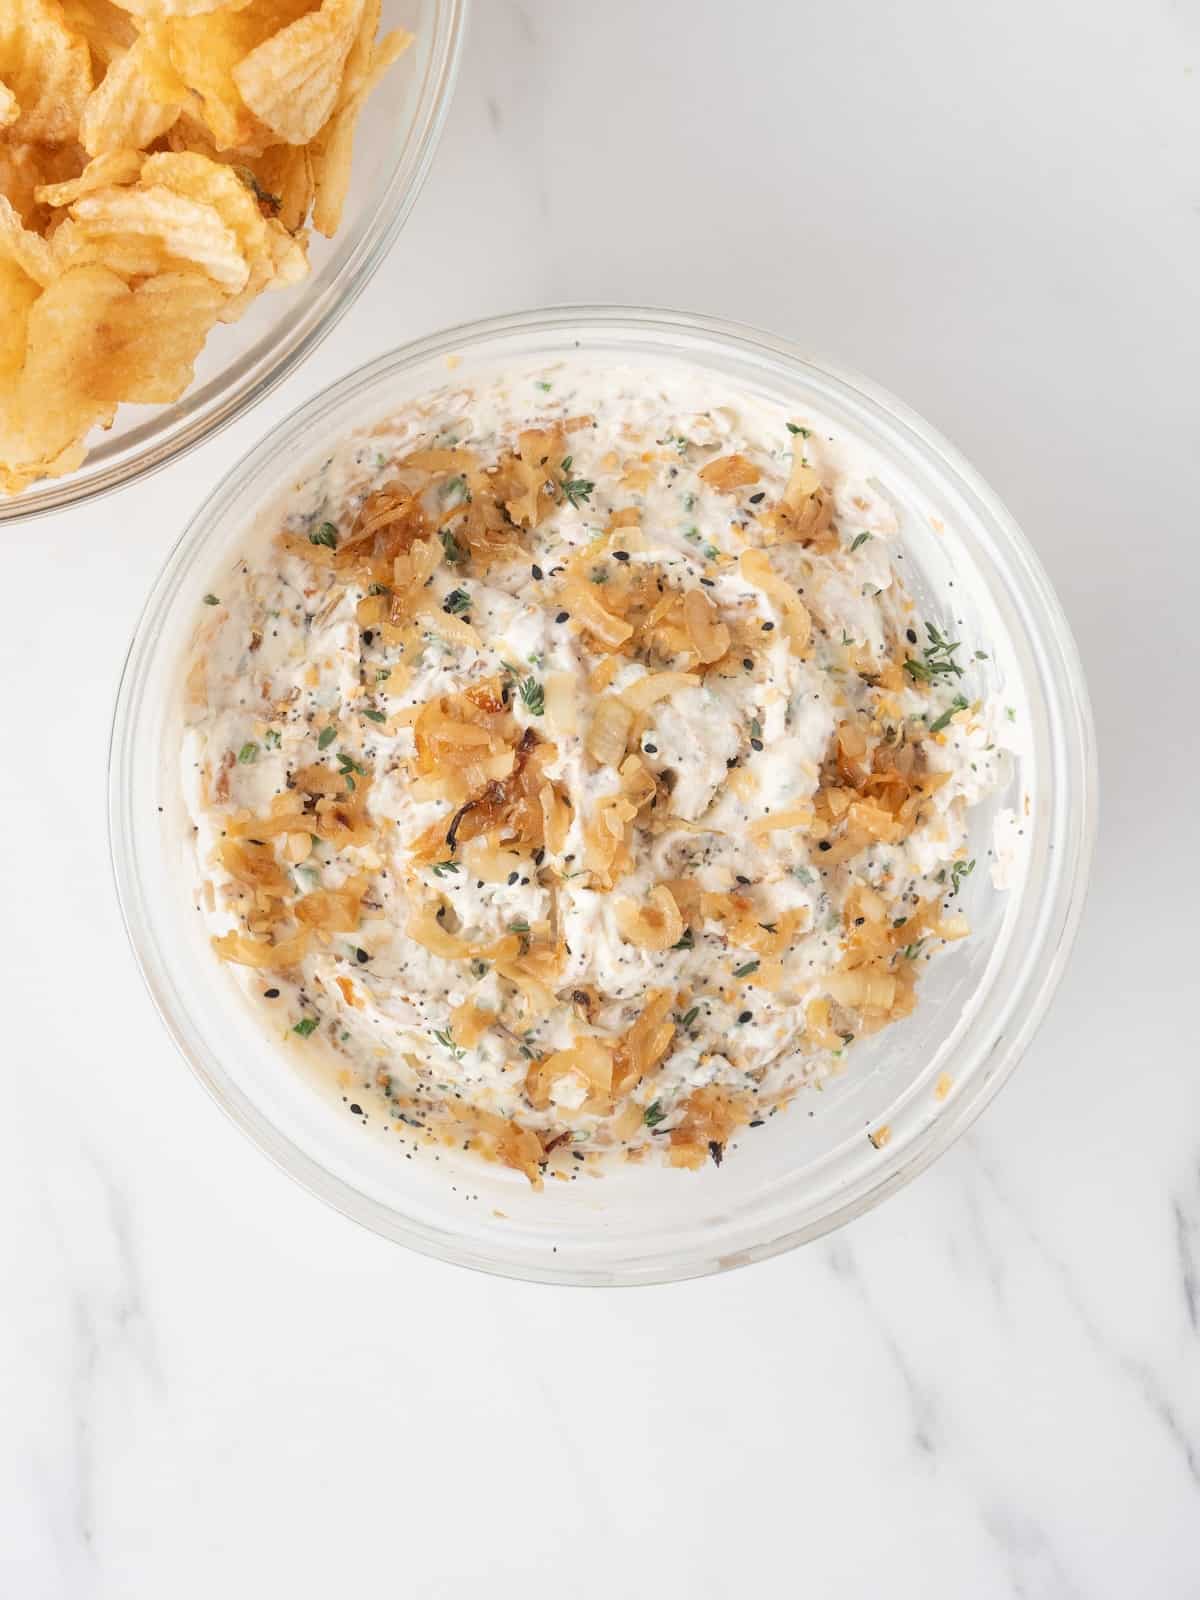 A large glass mixing bowl with roasted onion dip garnished with roasted onion and thyme, and a large bowl of potato chips on the side.